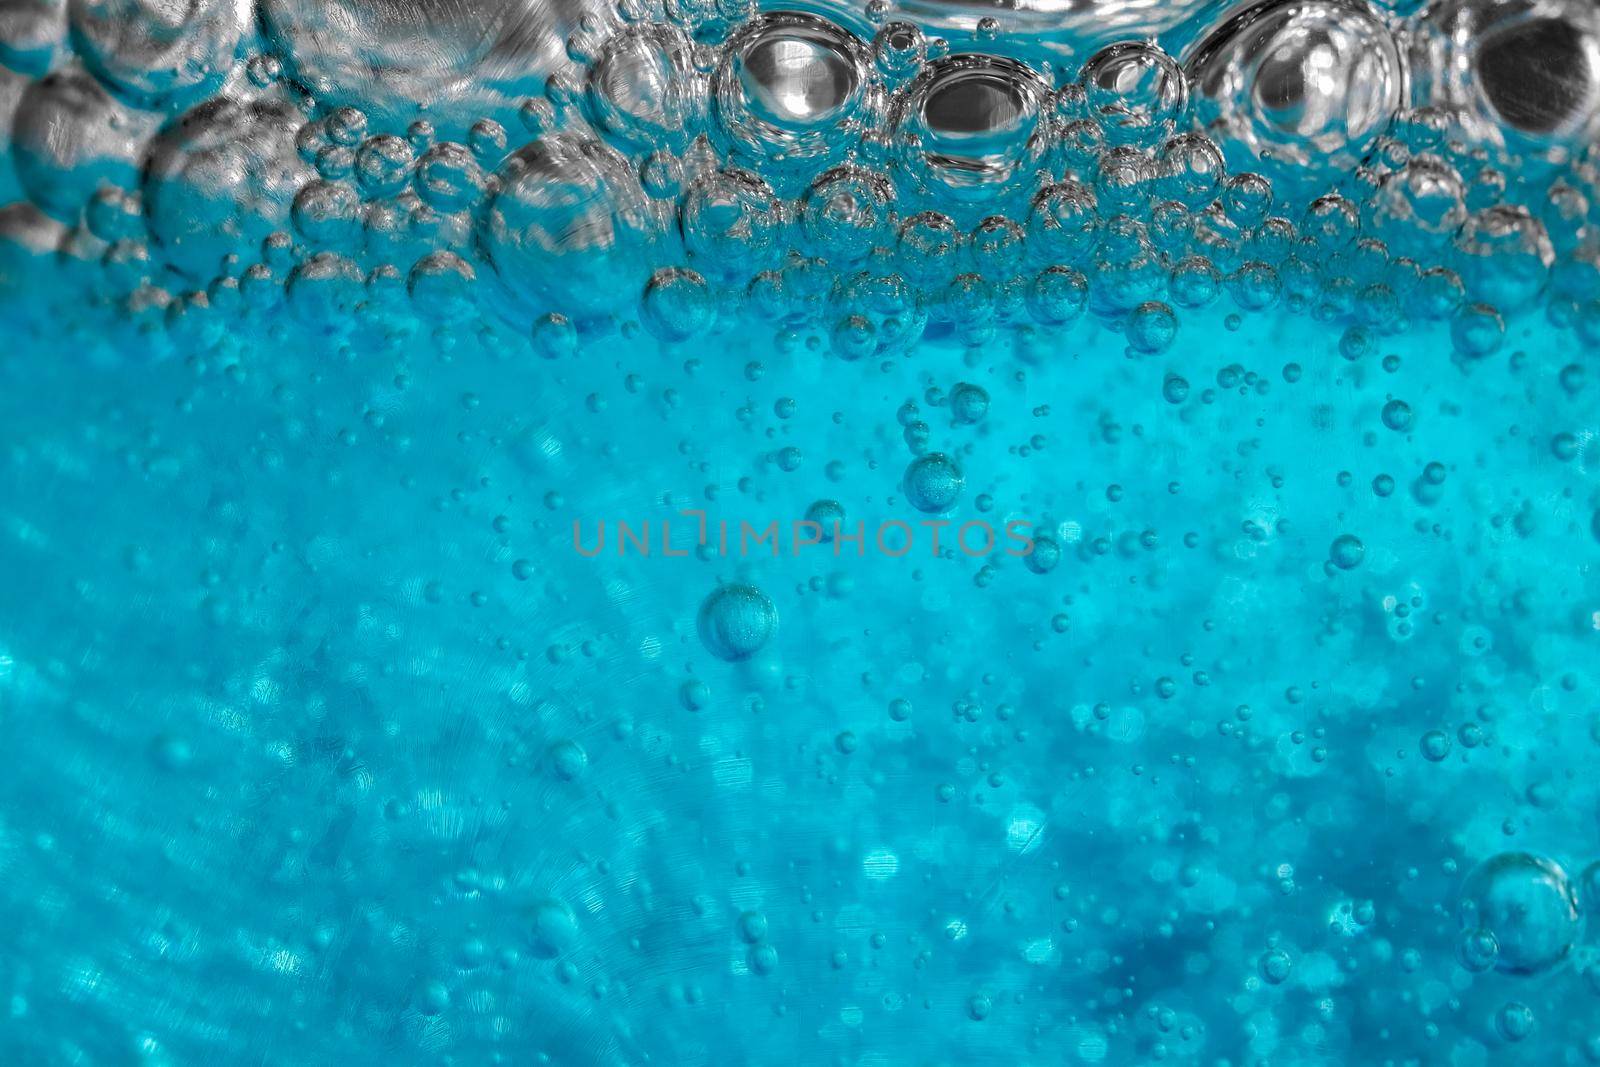 air bubbles in blue shampoos as background. High quality photo